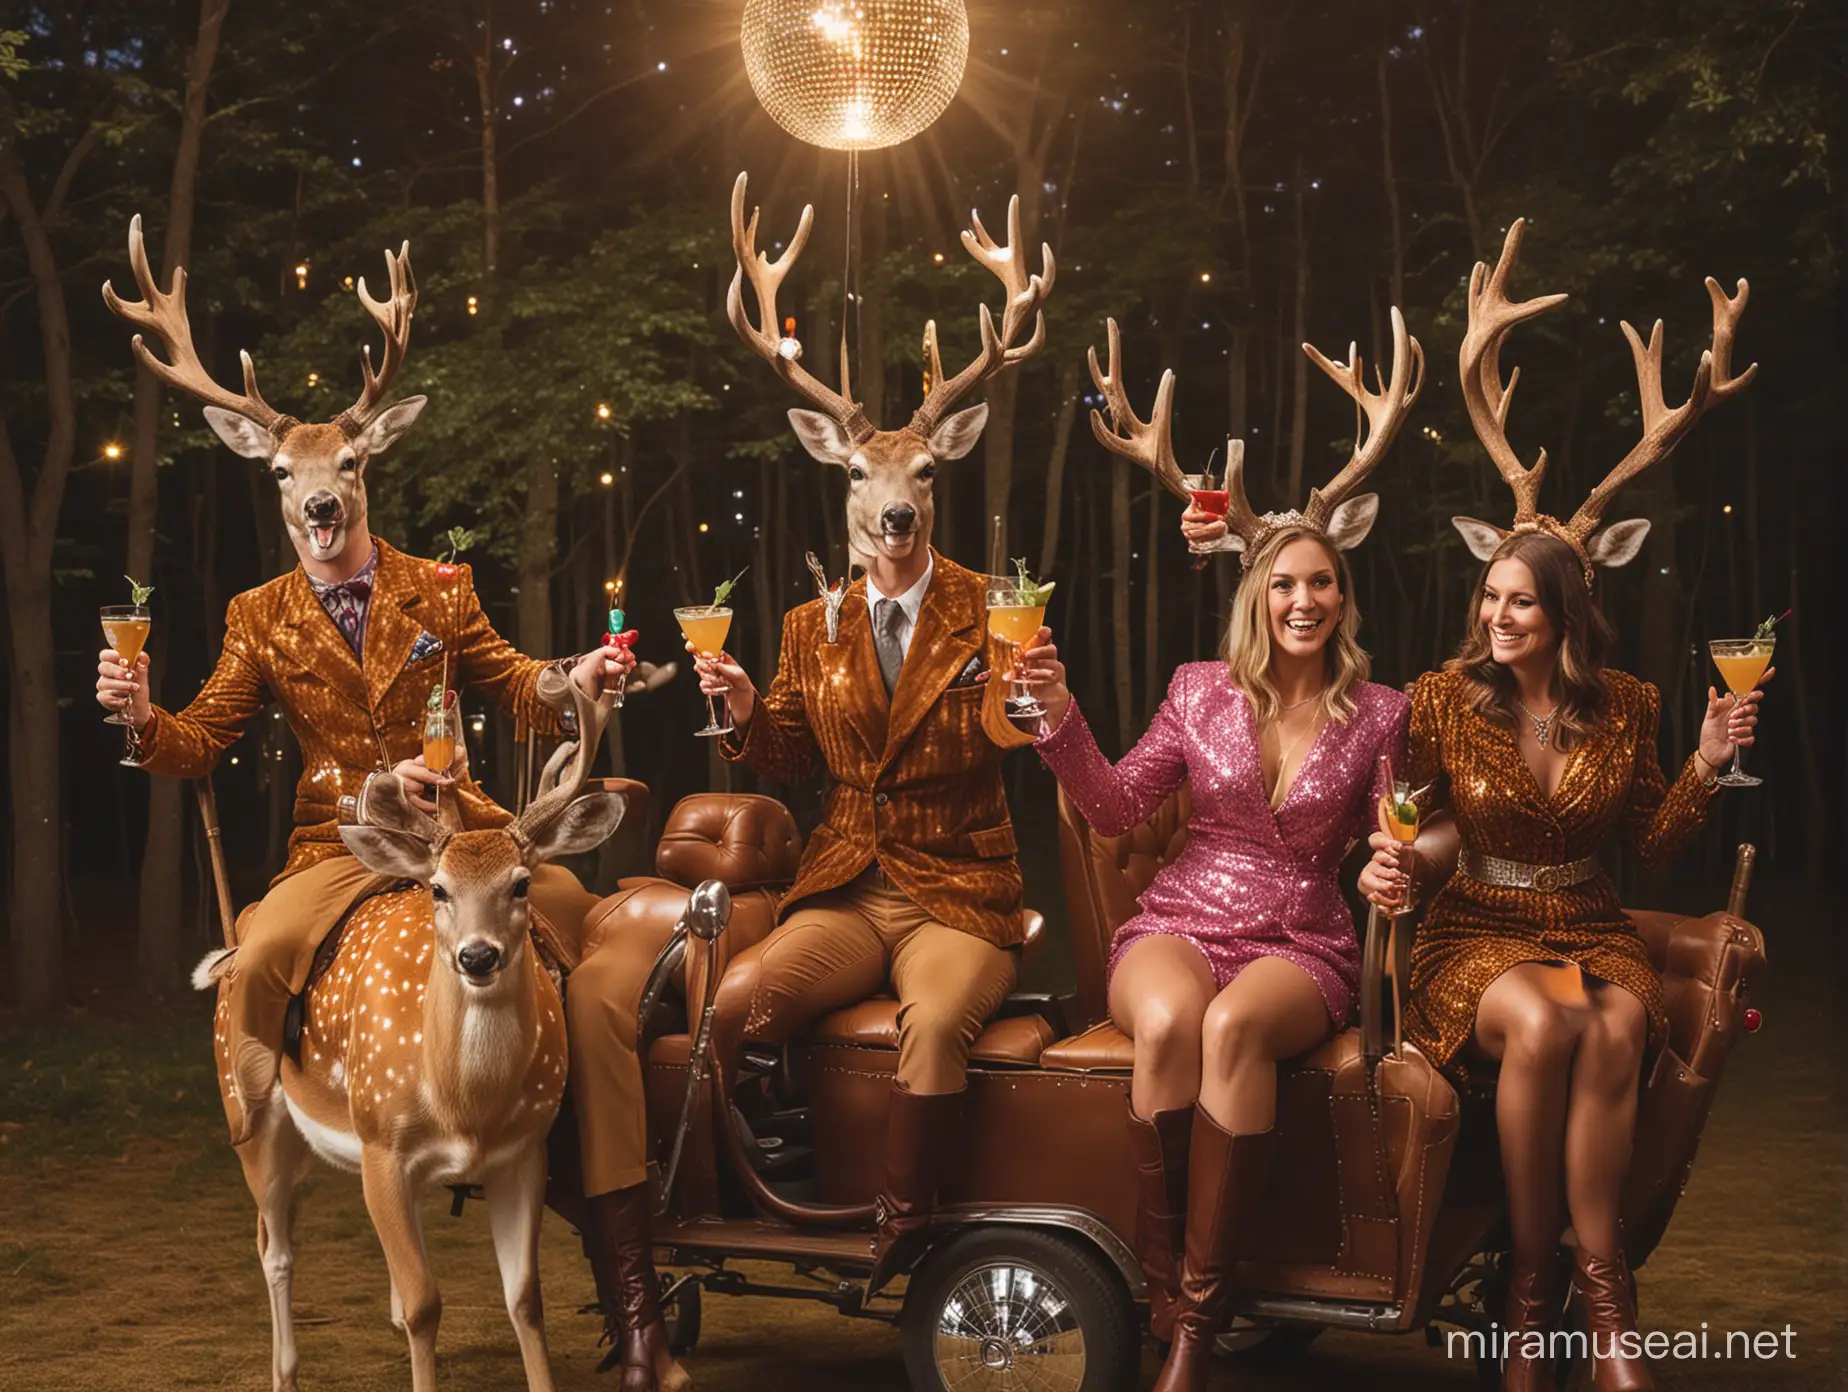 Disco Ball Antlers Deer Ride with CocktailToasting Revelers